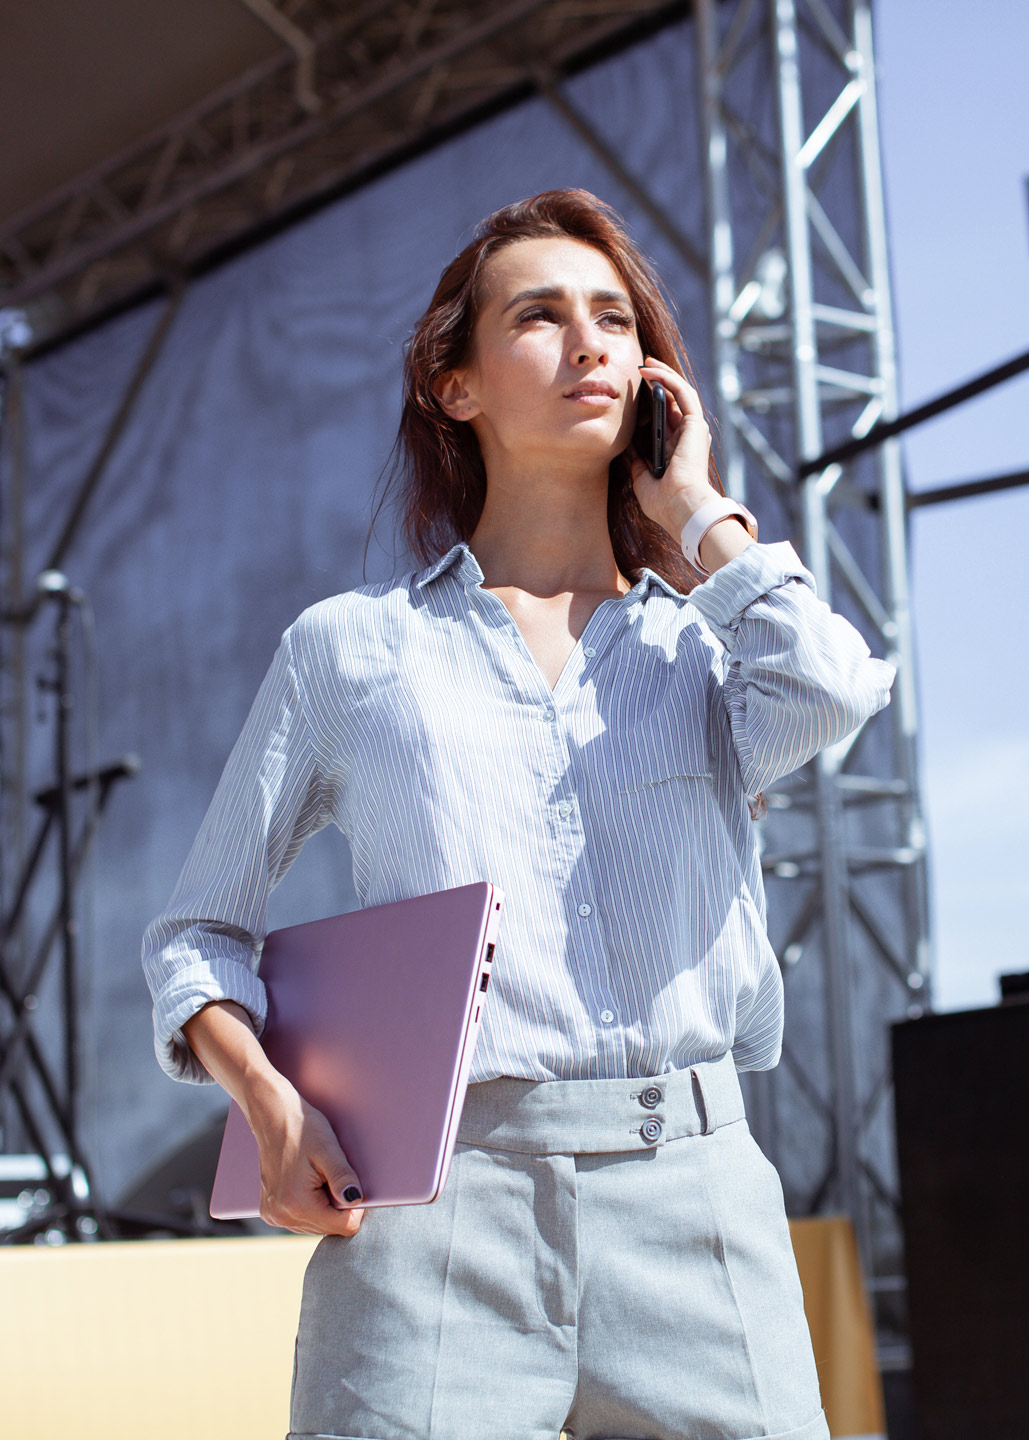 A woman on set of an outdoor event on the phone and holding her laptop.